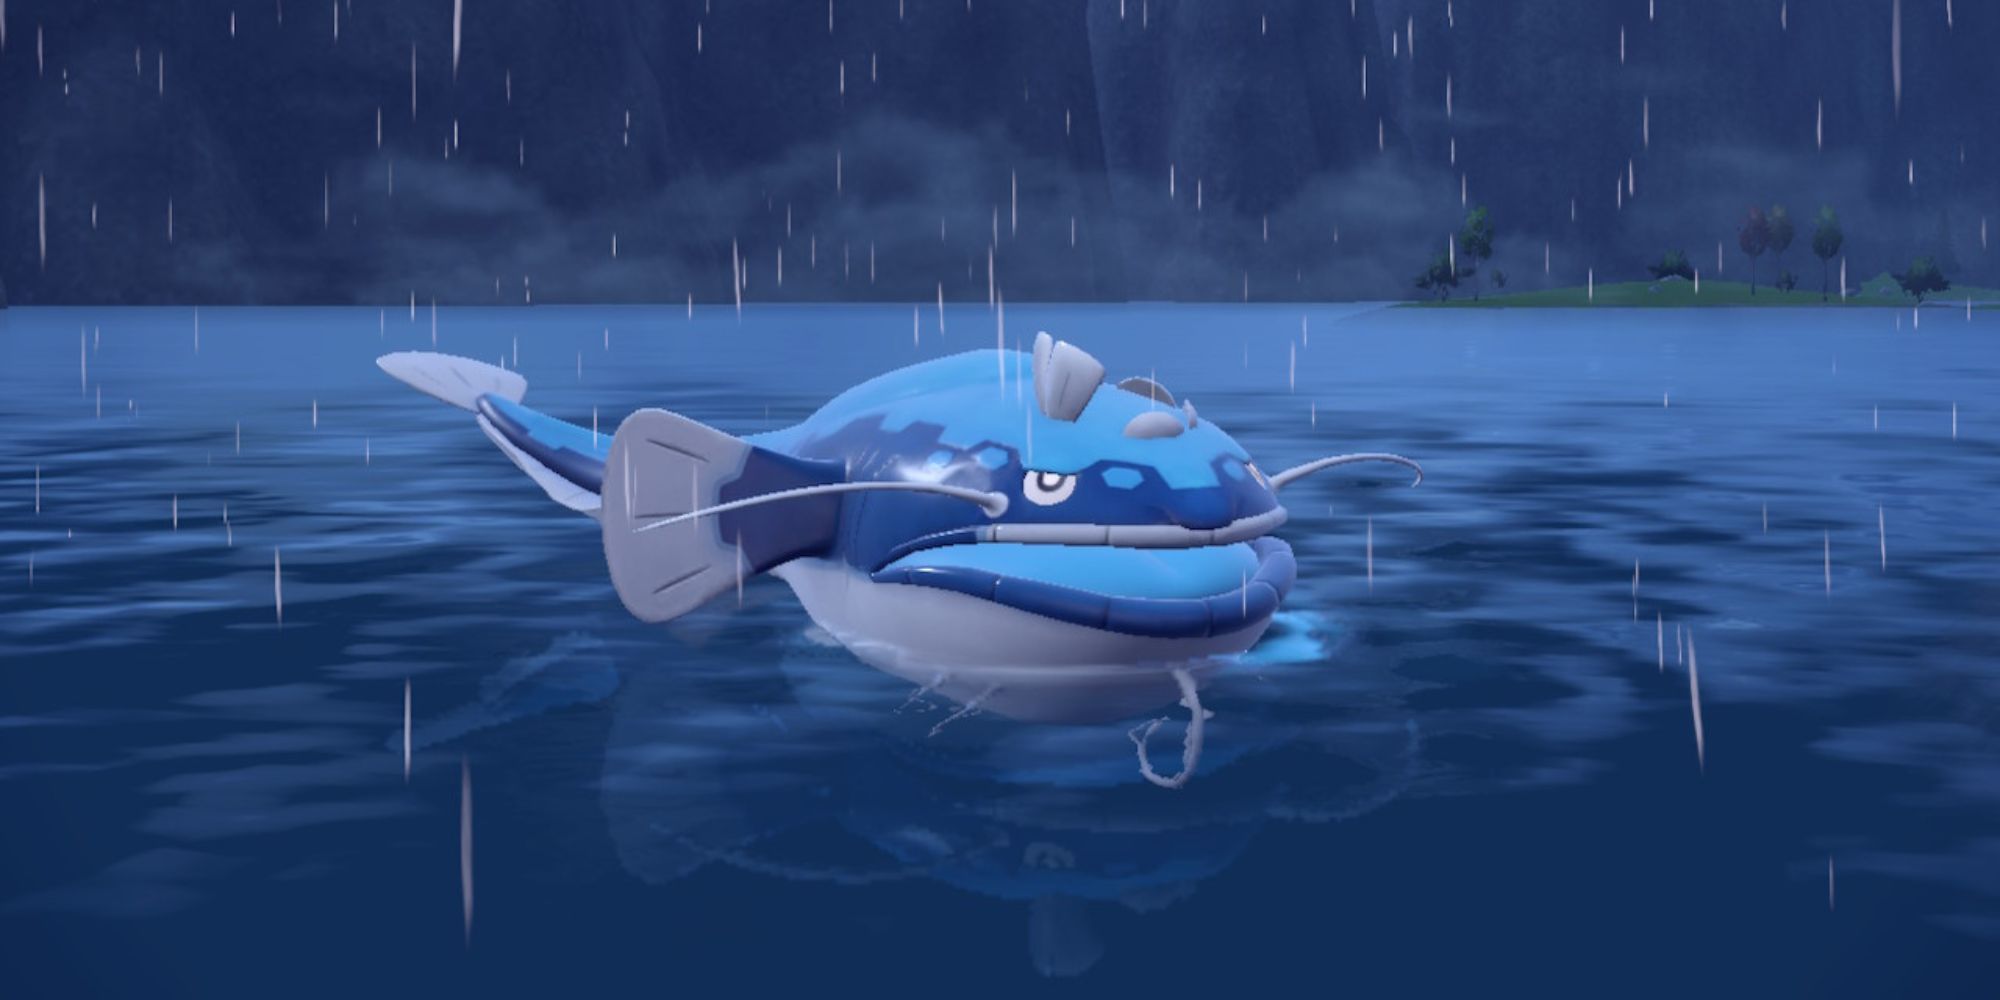 Dondozo floats in the water while it rains